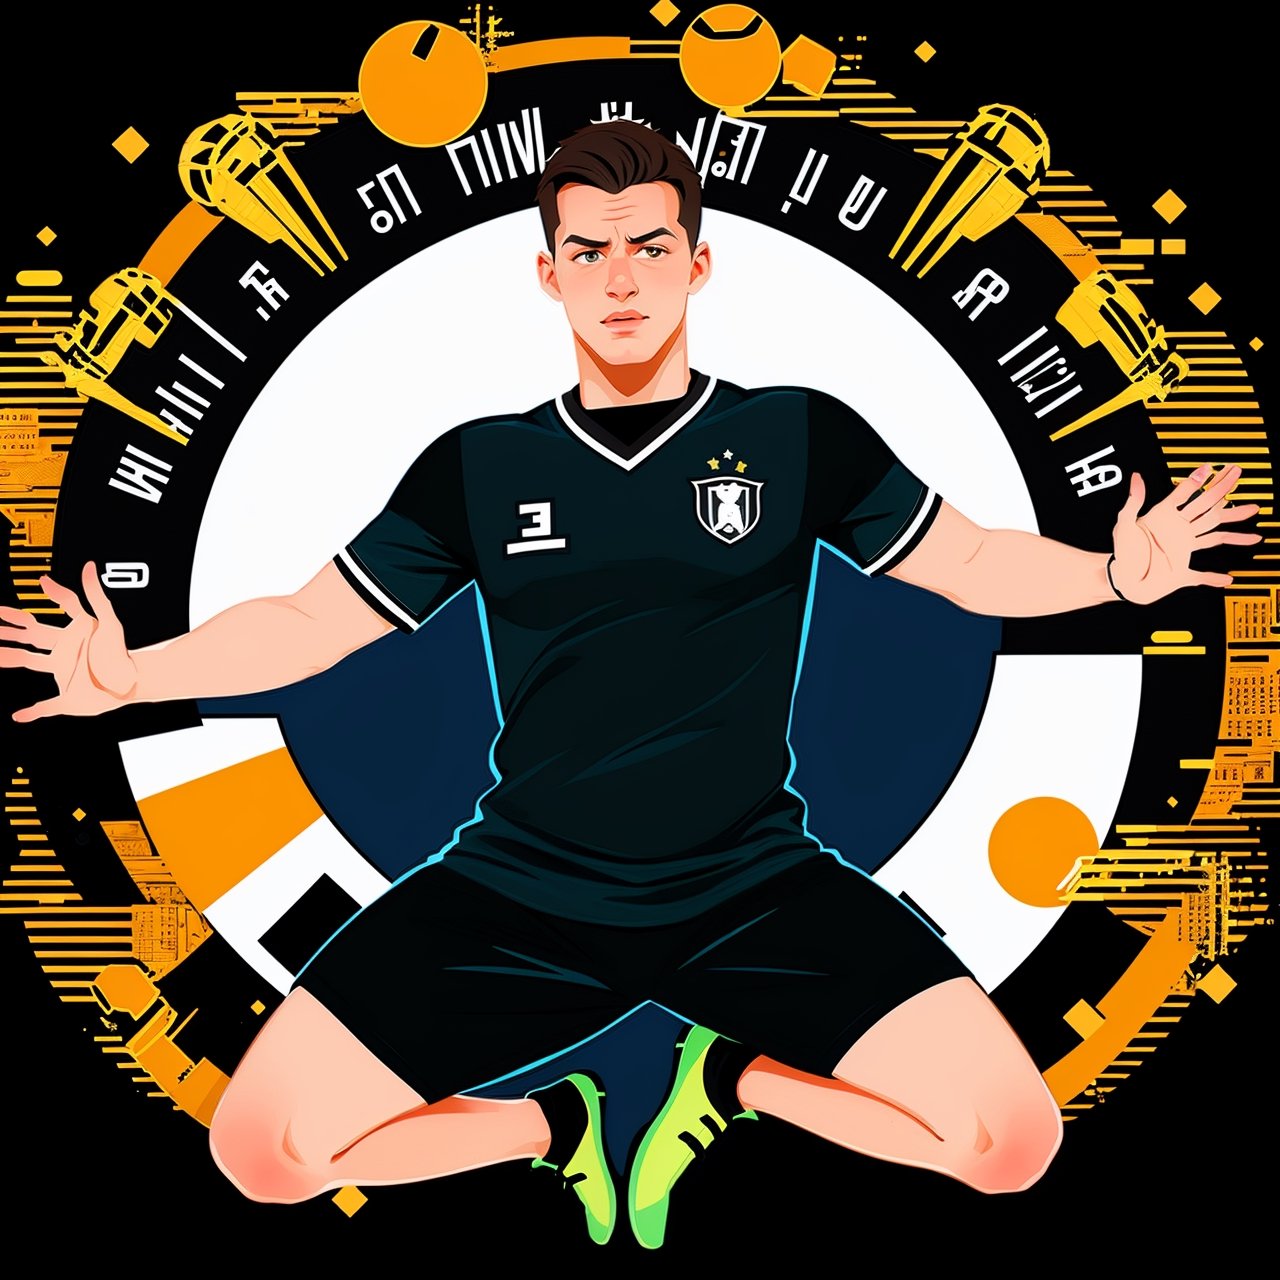 shadow flat vector art,1  young handsome men, Shot Soccer Jump, Germany Male Soccer Players, vasco jersey, man, frowning face,2D Flat Illustration